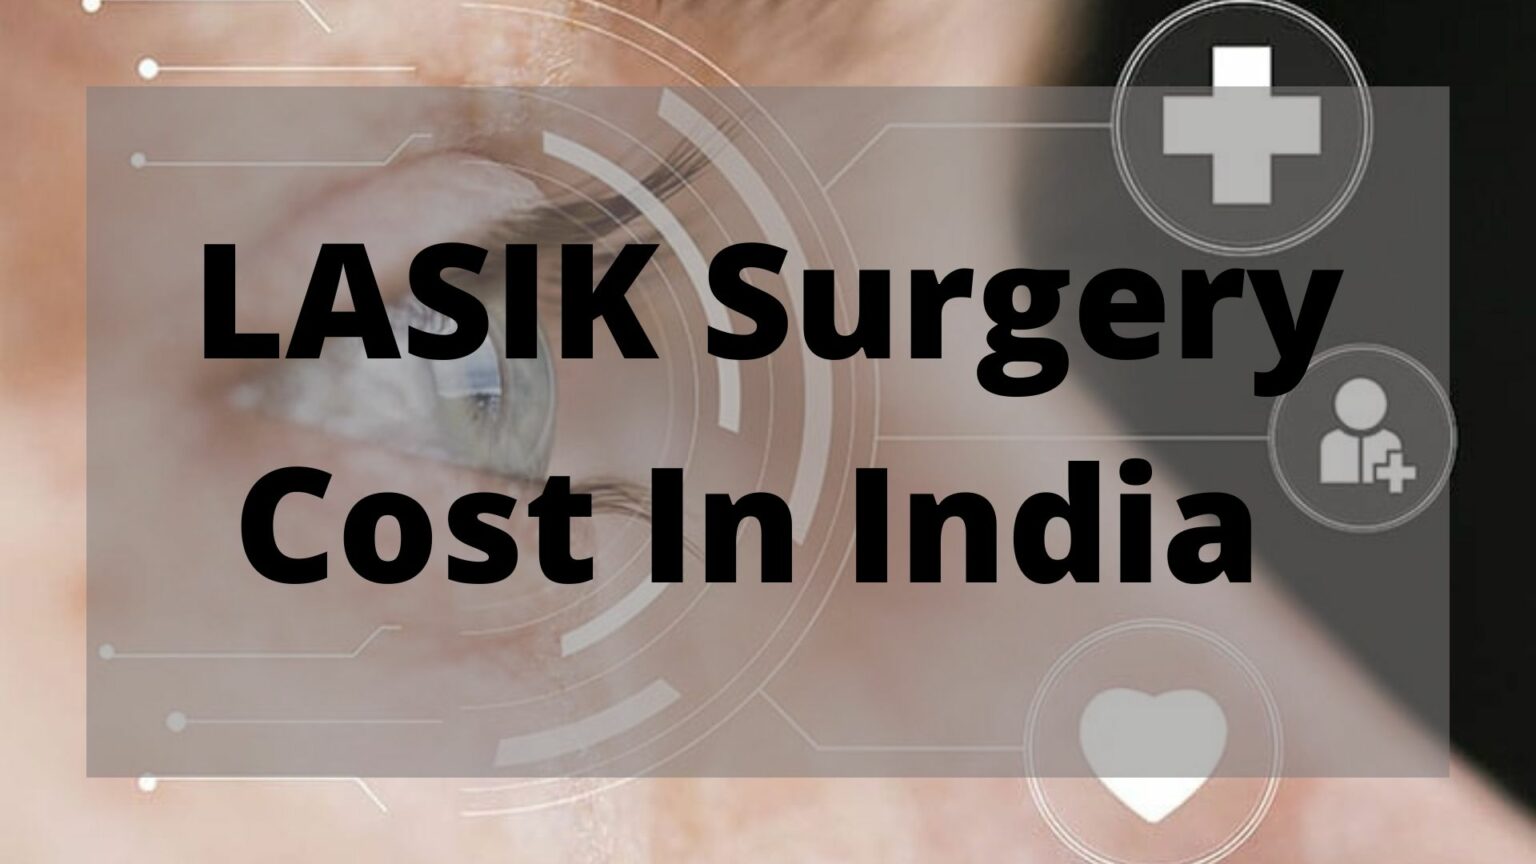 LASIK Surgery Cost In India 1536x864 